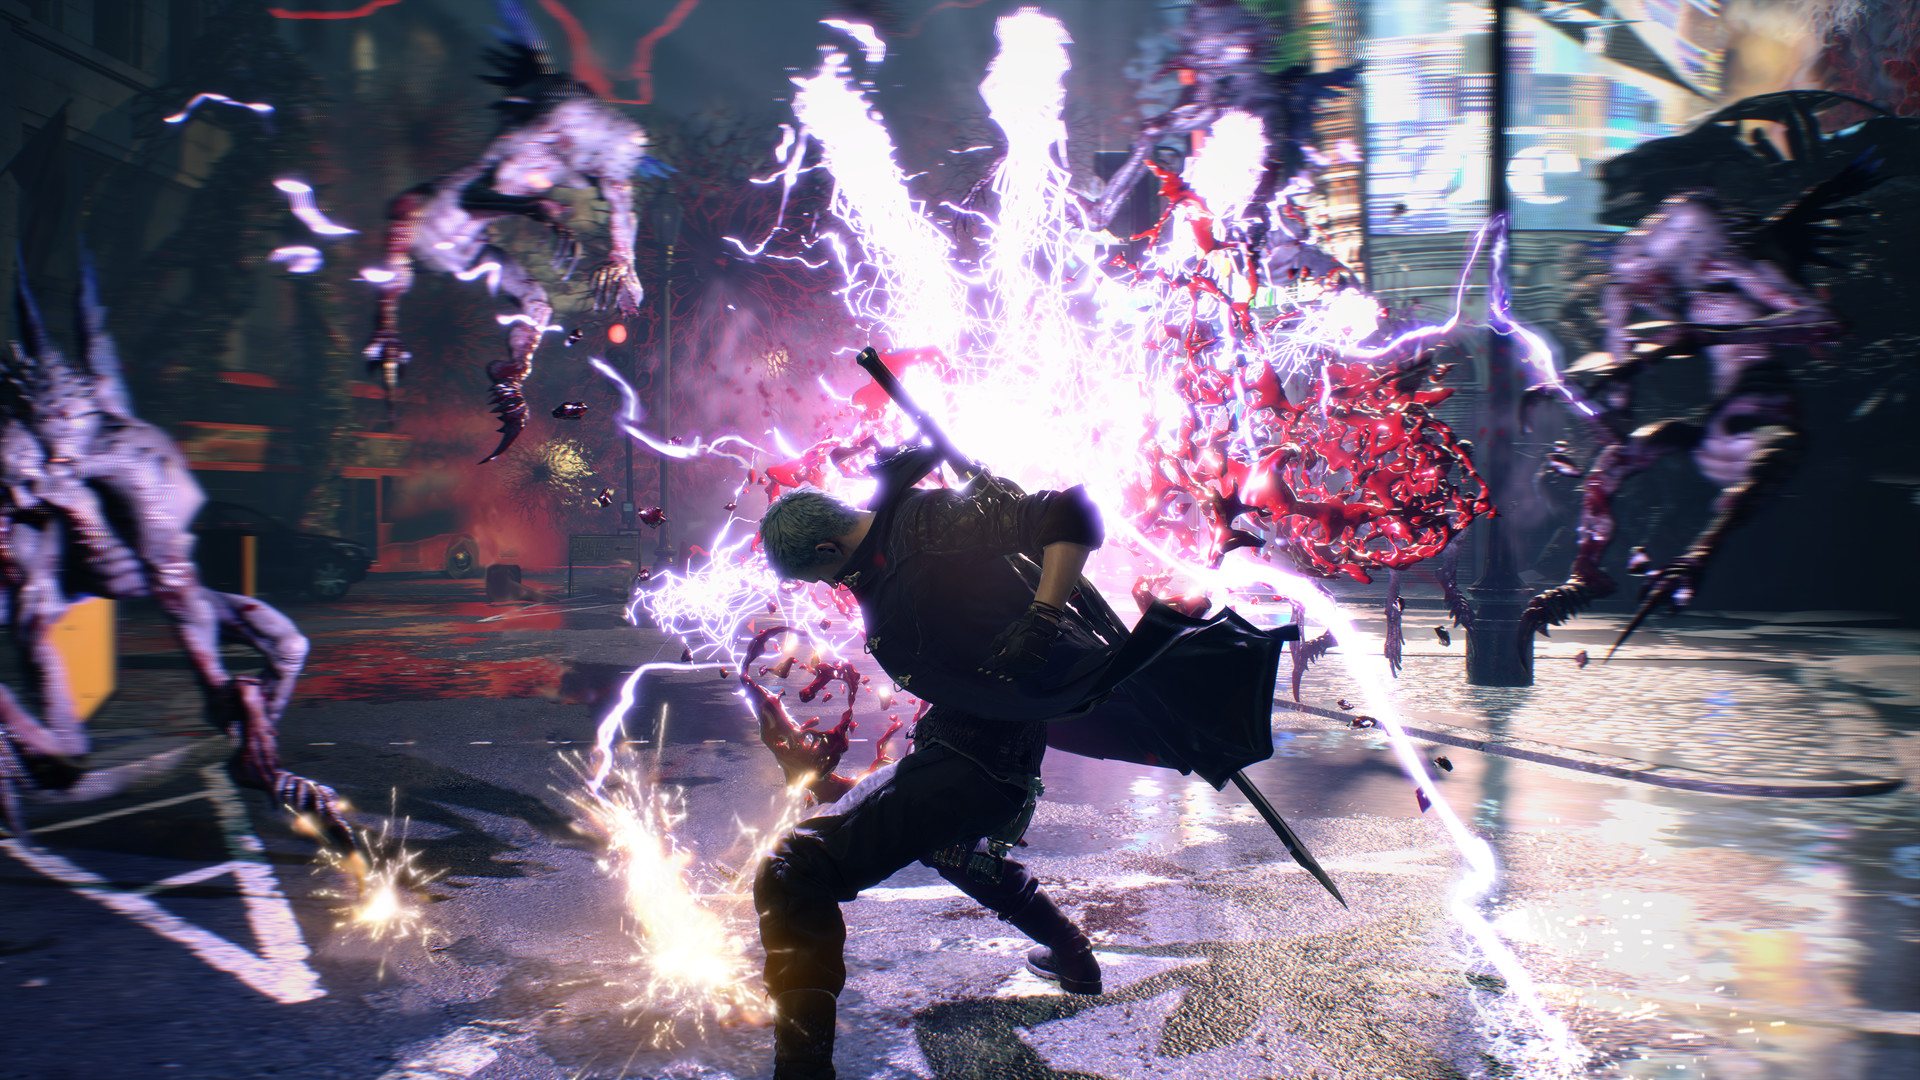 Devil May Cry 5 PlayStation 4 Account pixelpuffin.net Activation Link [USD 13.55]